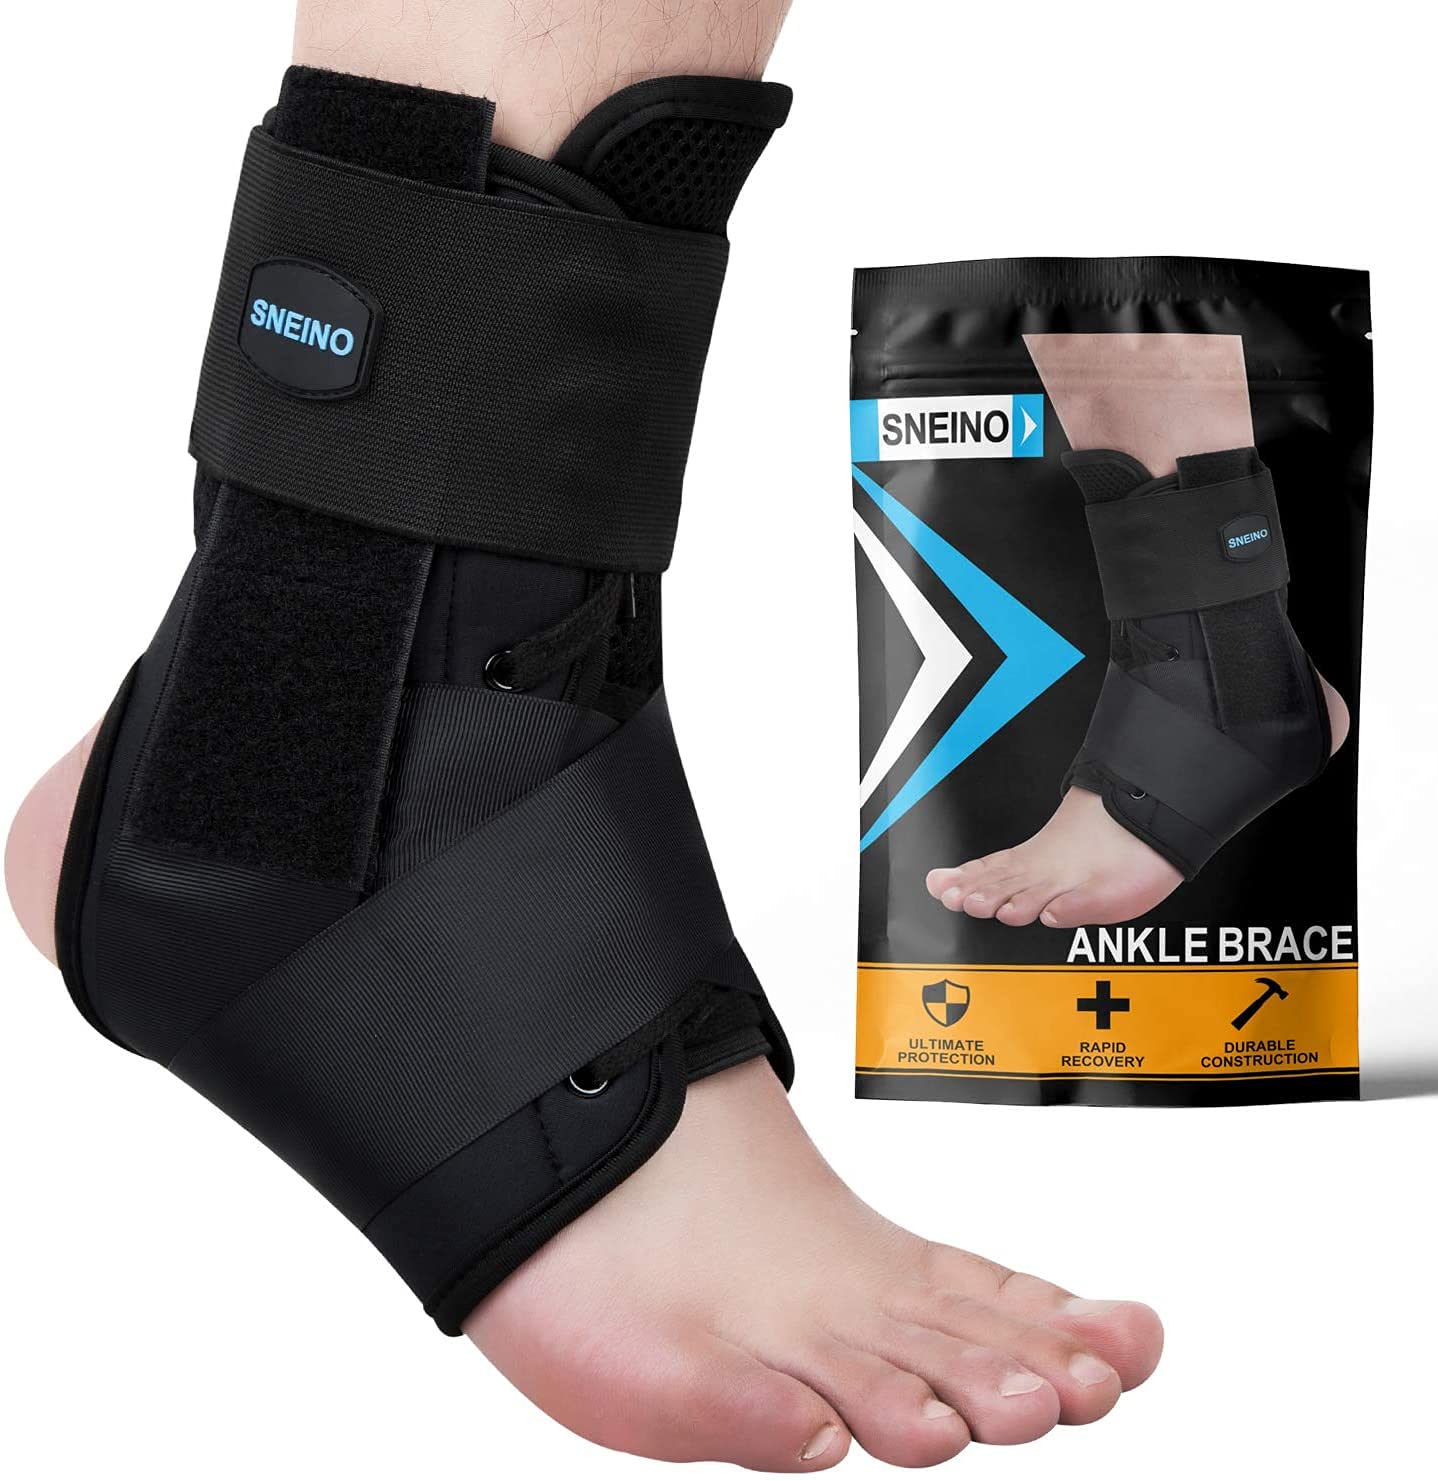 SNEINO Ankle Brace Review